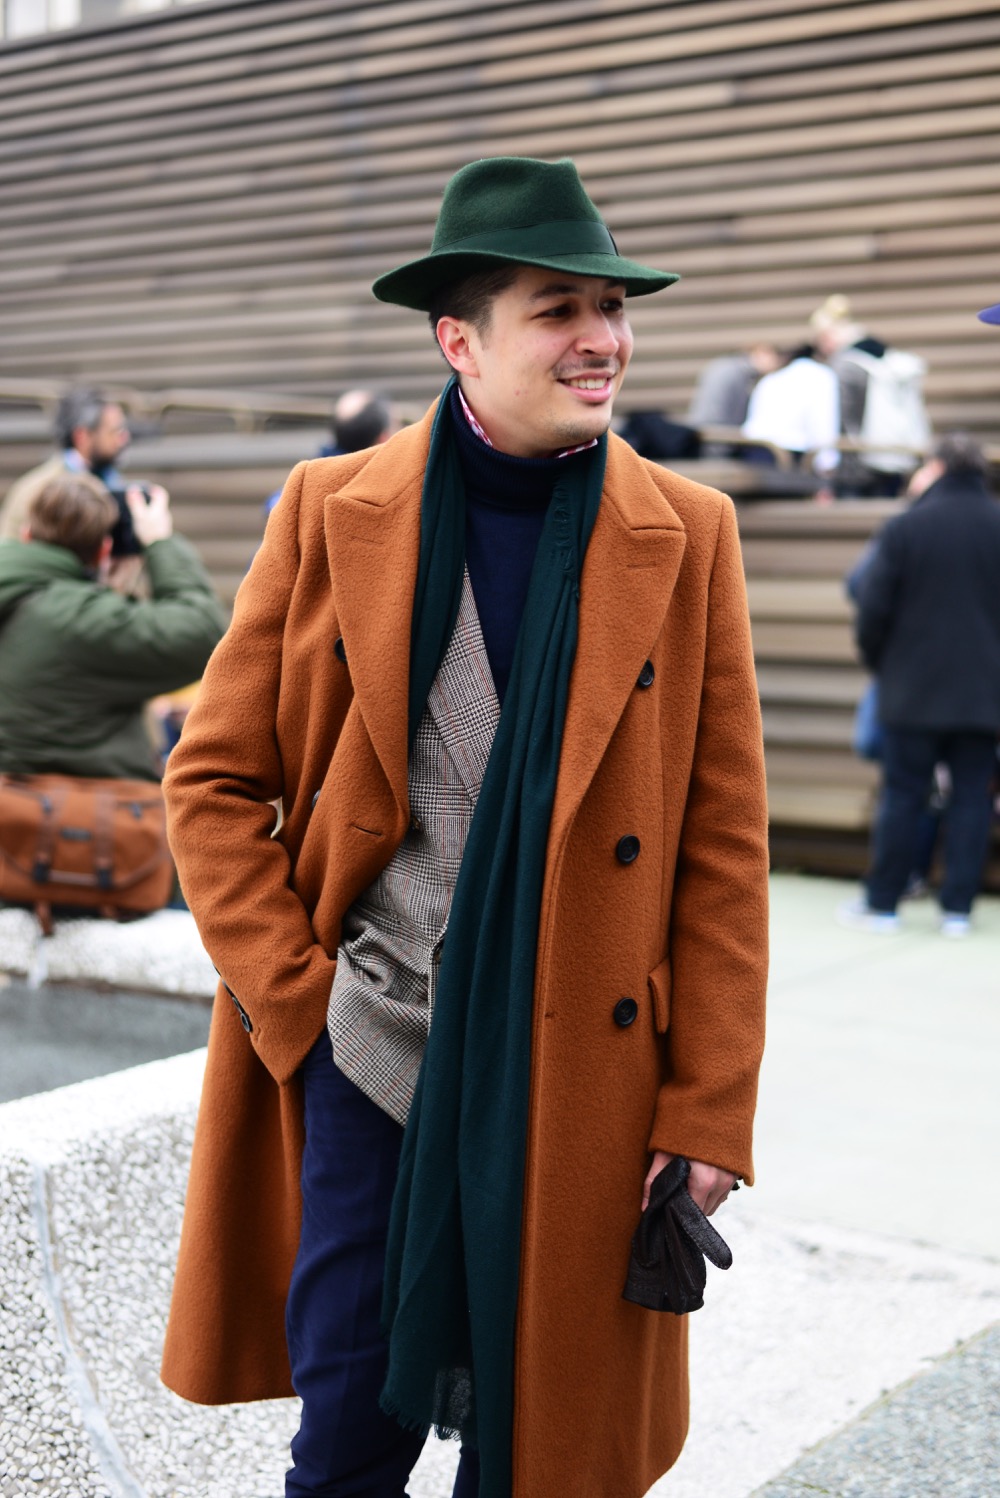 Here’s What the Best-Dressed Men at Pitti Uomo 91 Are Wearing | Sharp